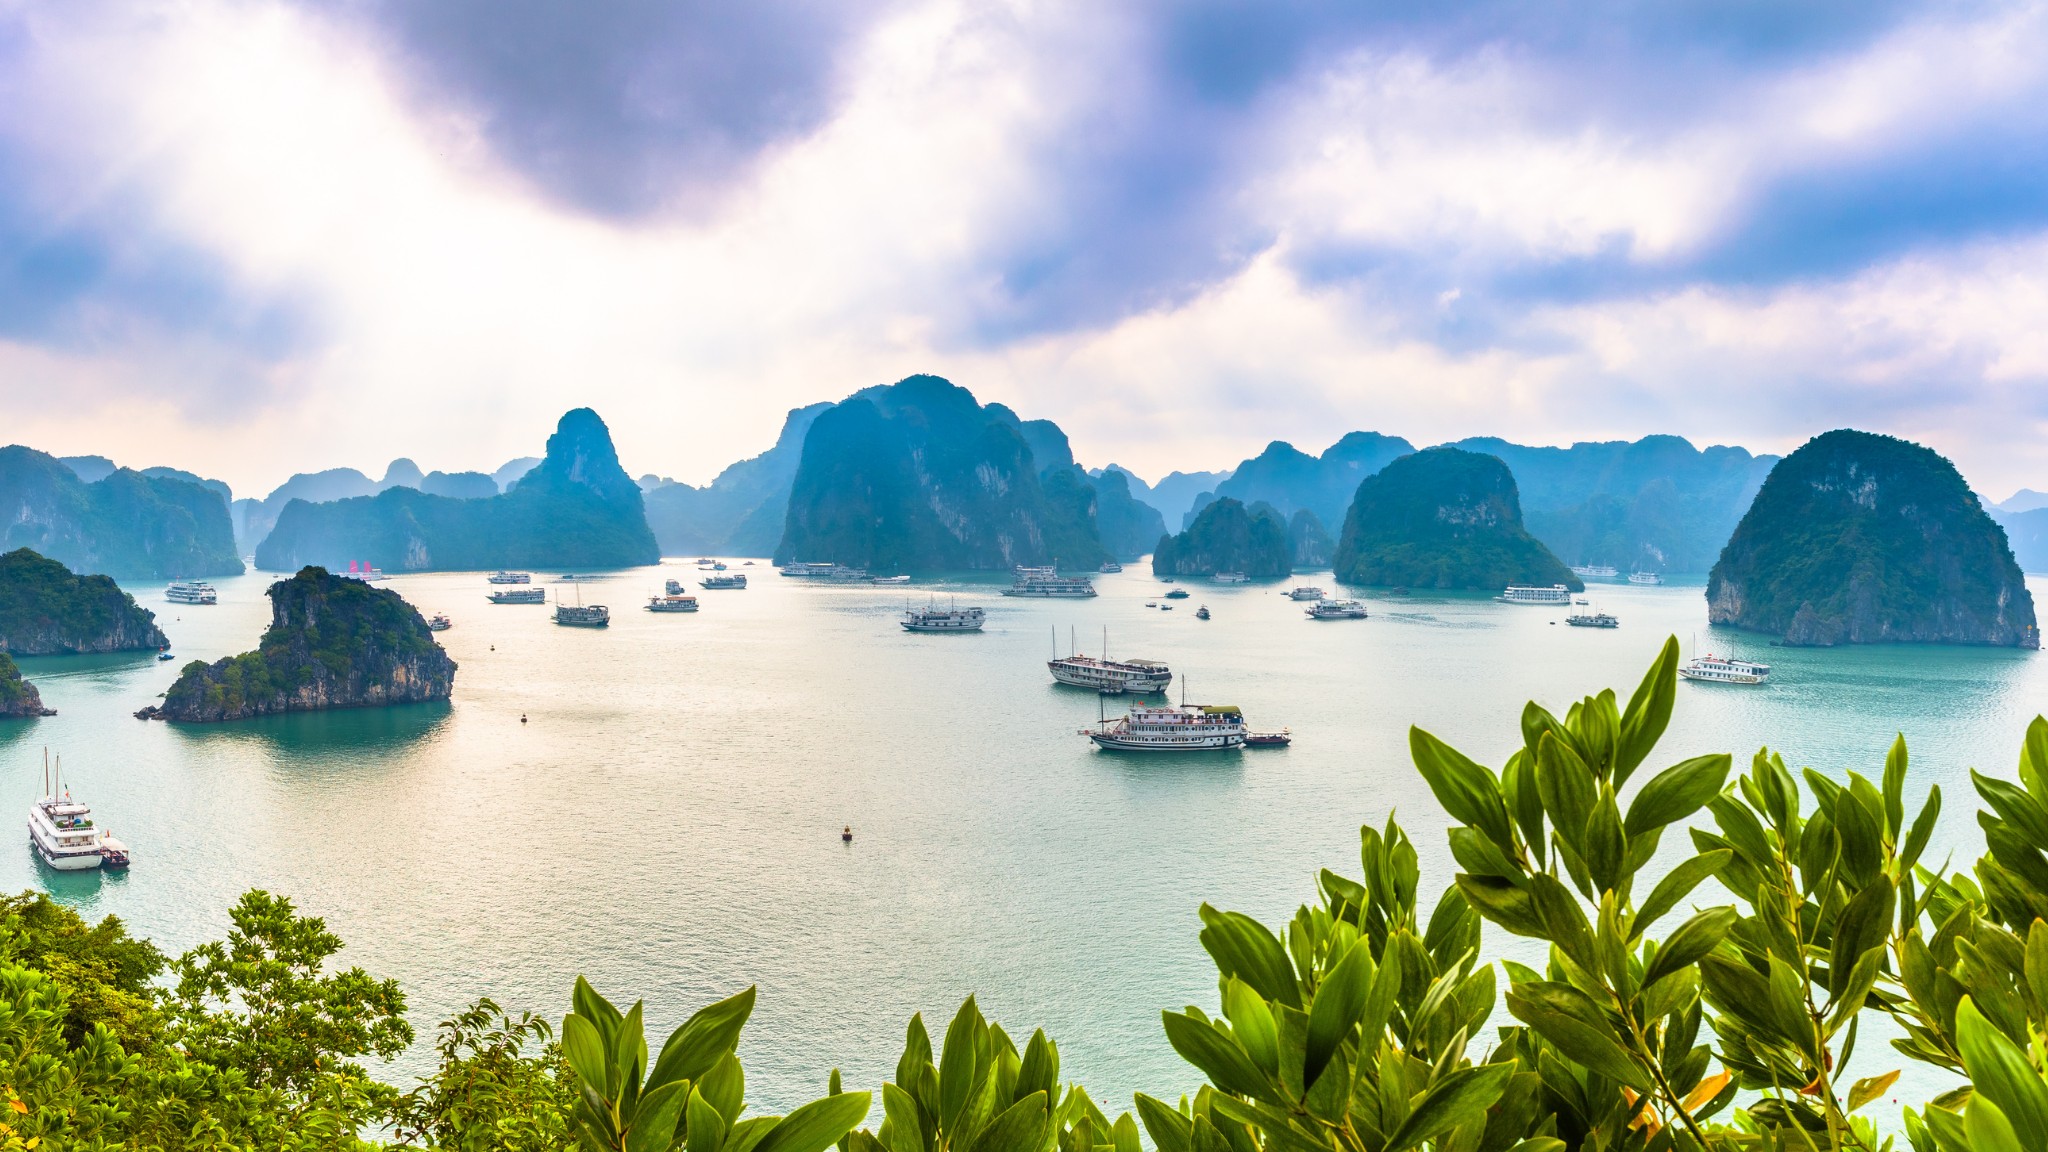 Day 4 The World Natural Heritage Site Halong Bay